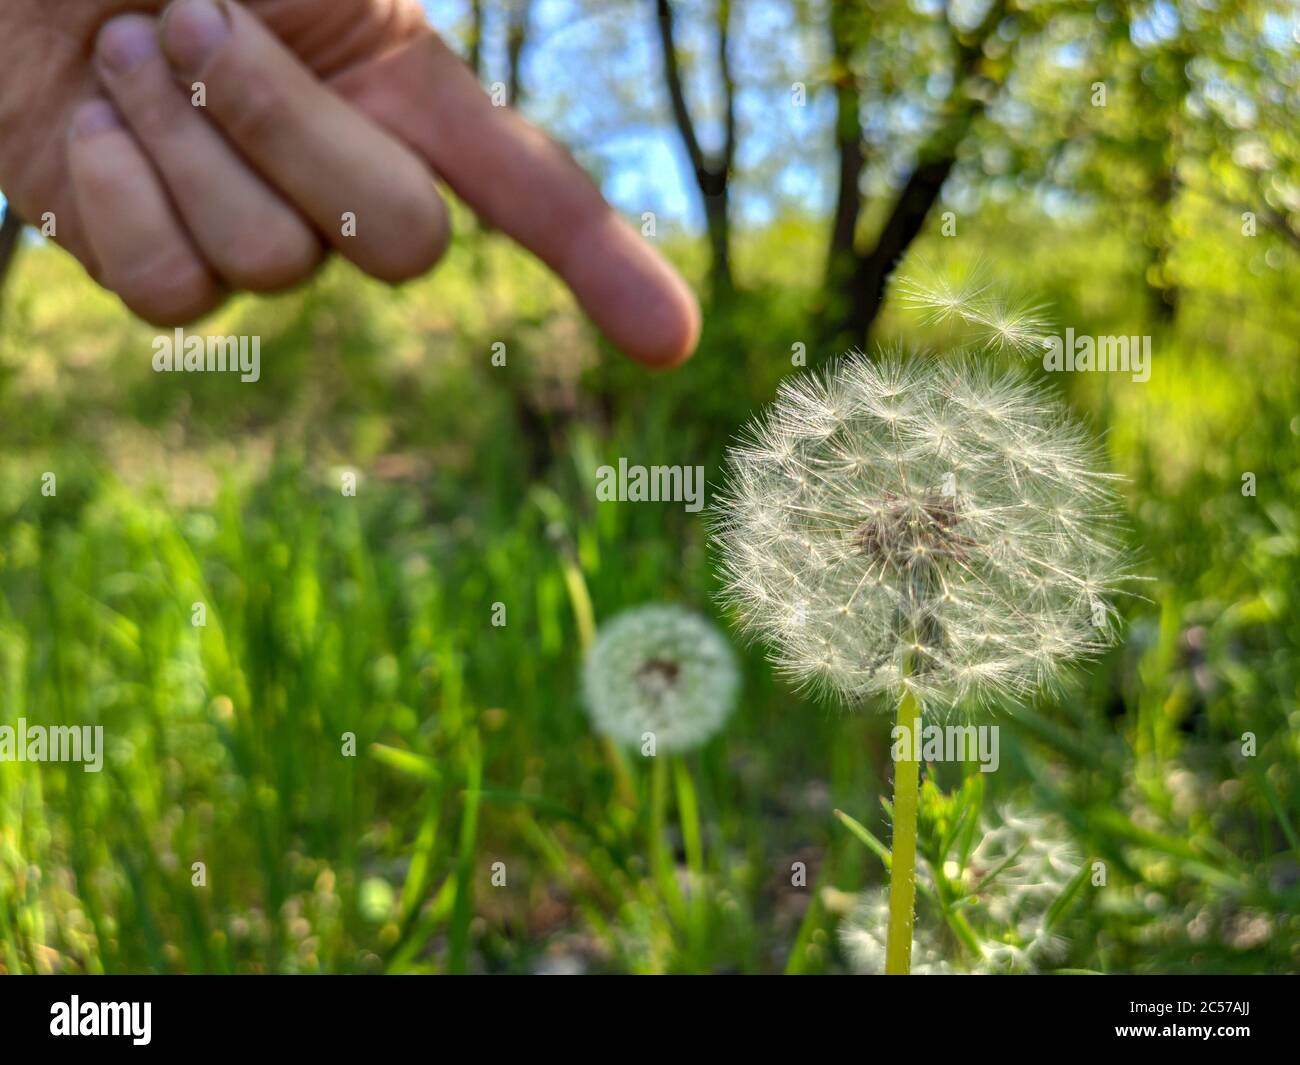 points finger on dandelion in the grass Stock Photo